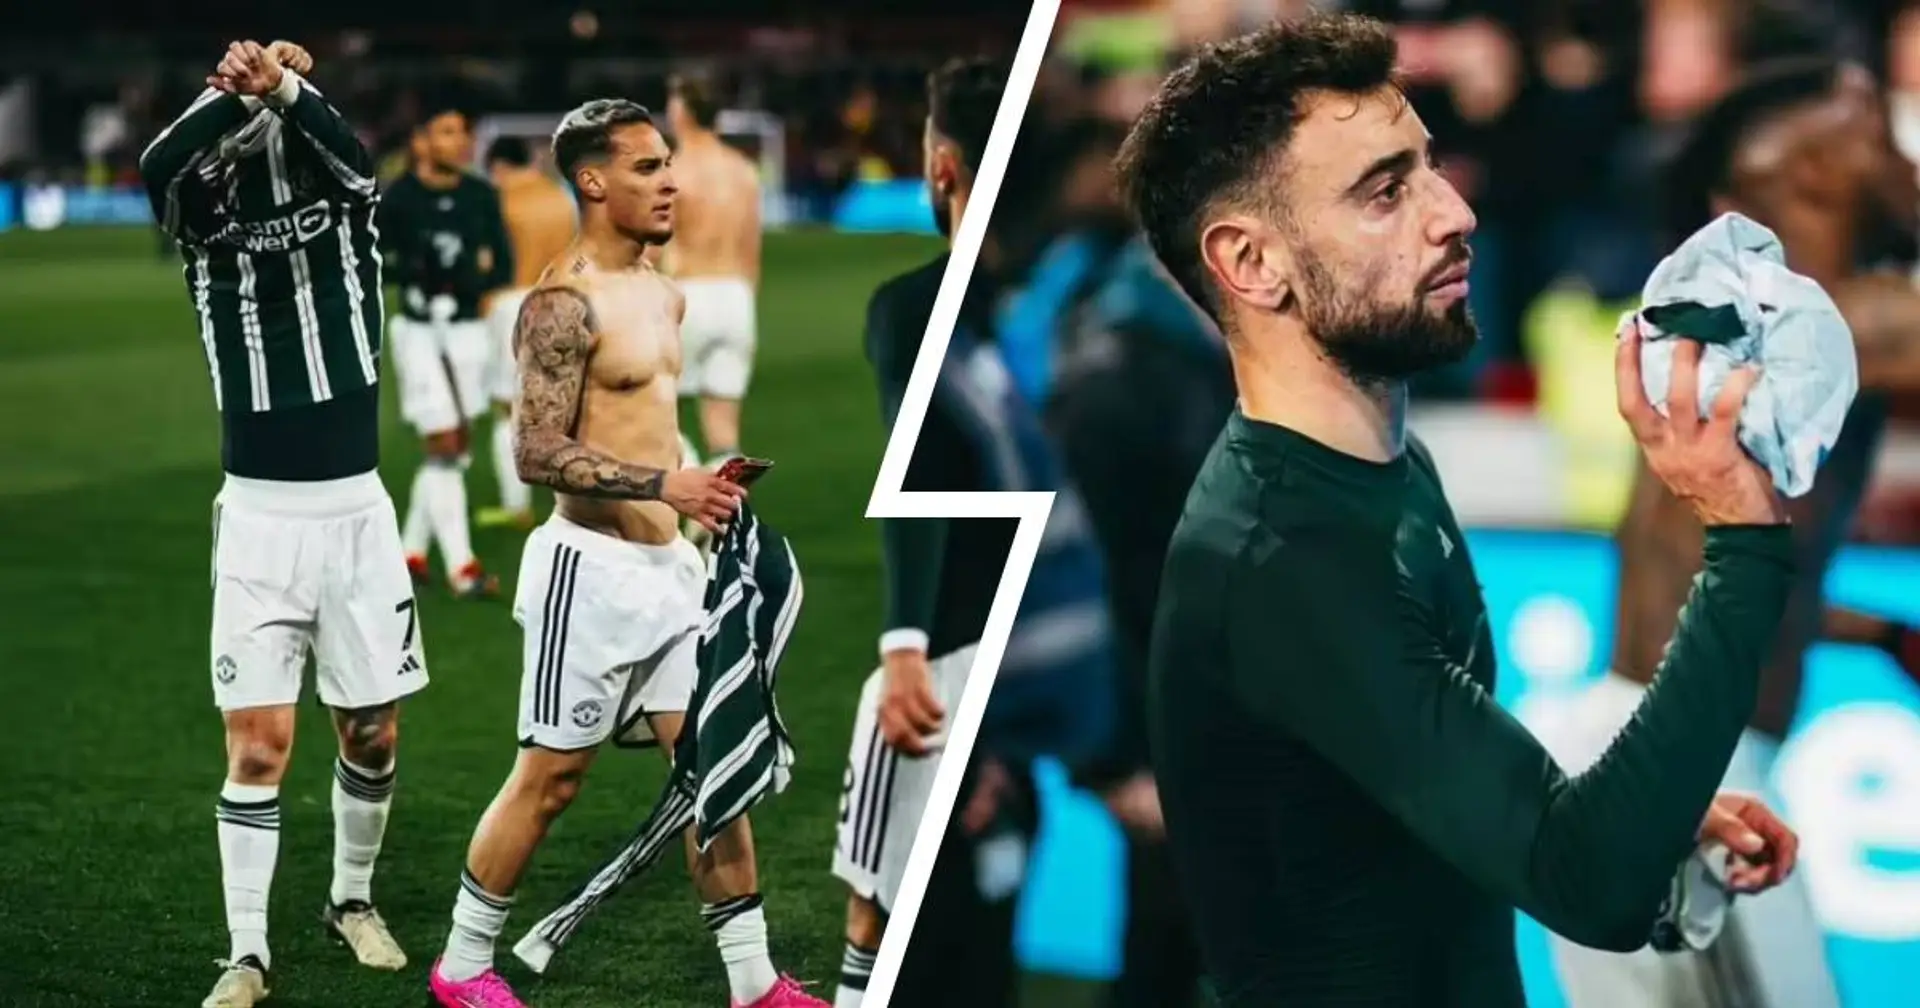 Bruno Fernandes leads Man United players in classy post-match gesture for travelling fans